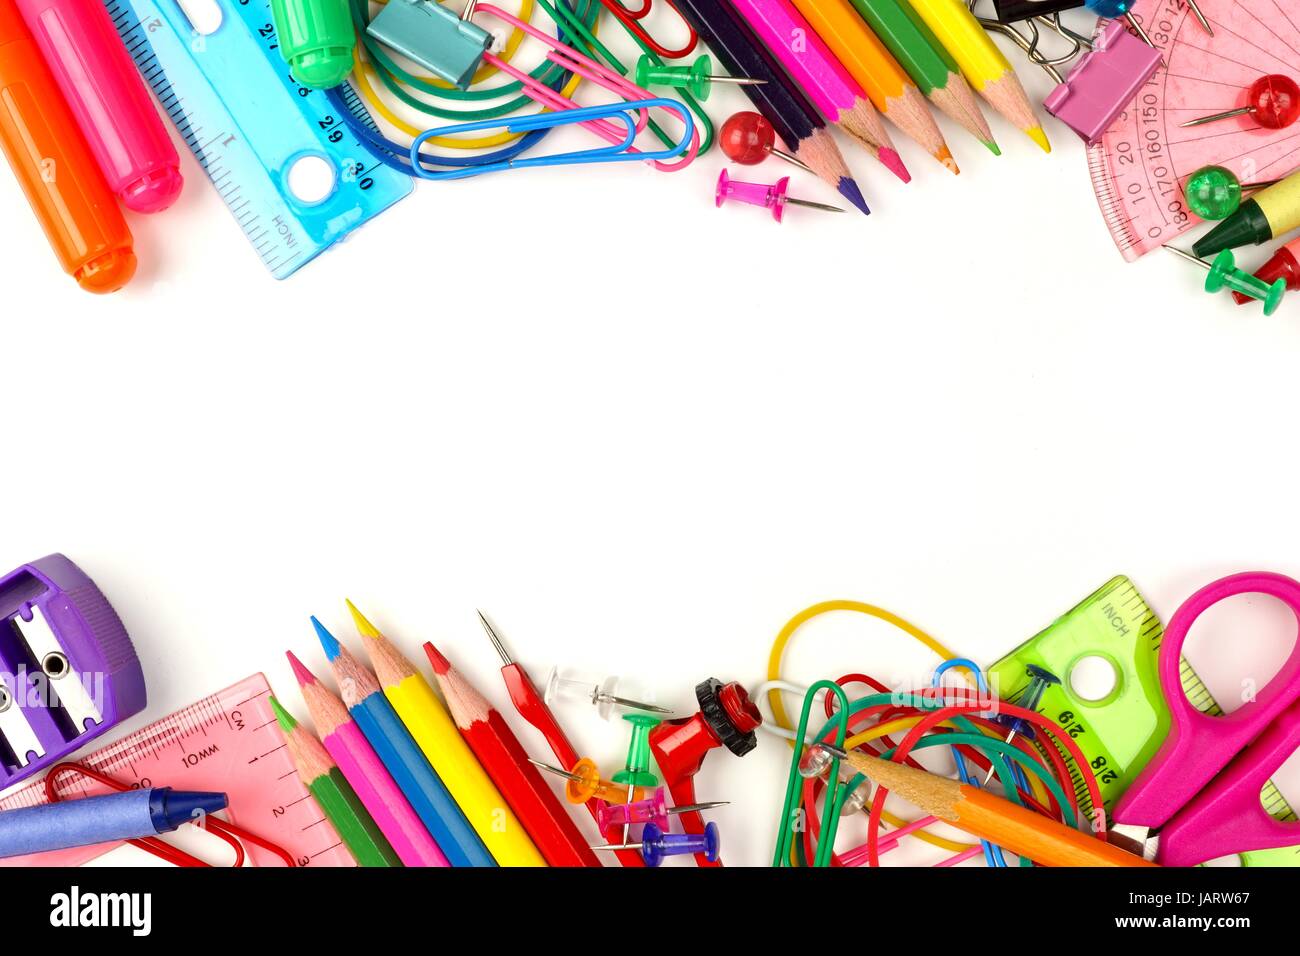 Double border of colorful school supplies on a white background Stock Photo